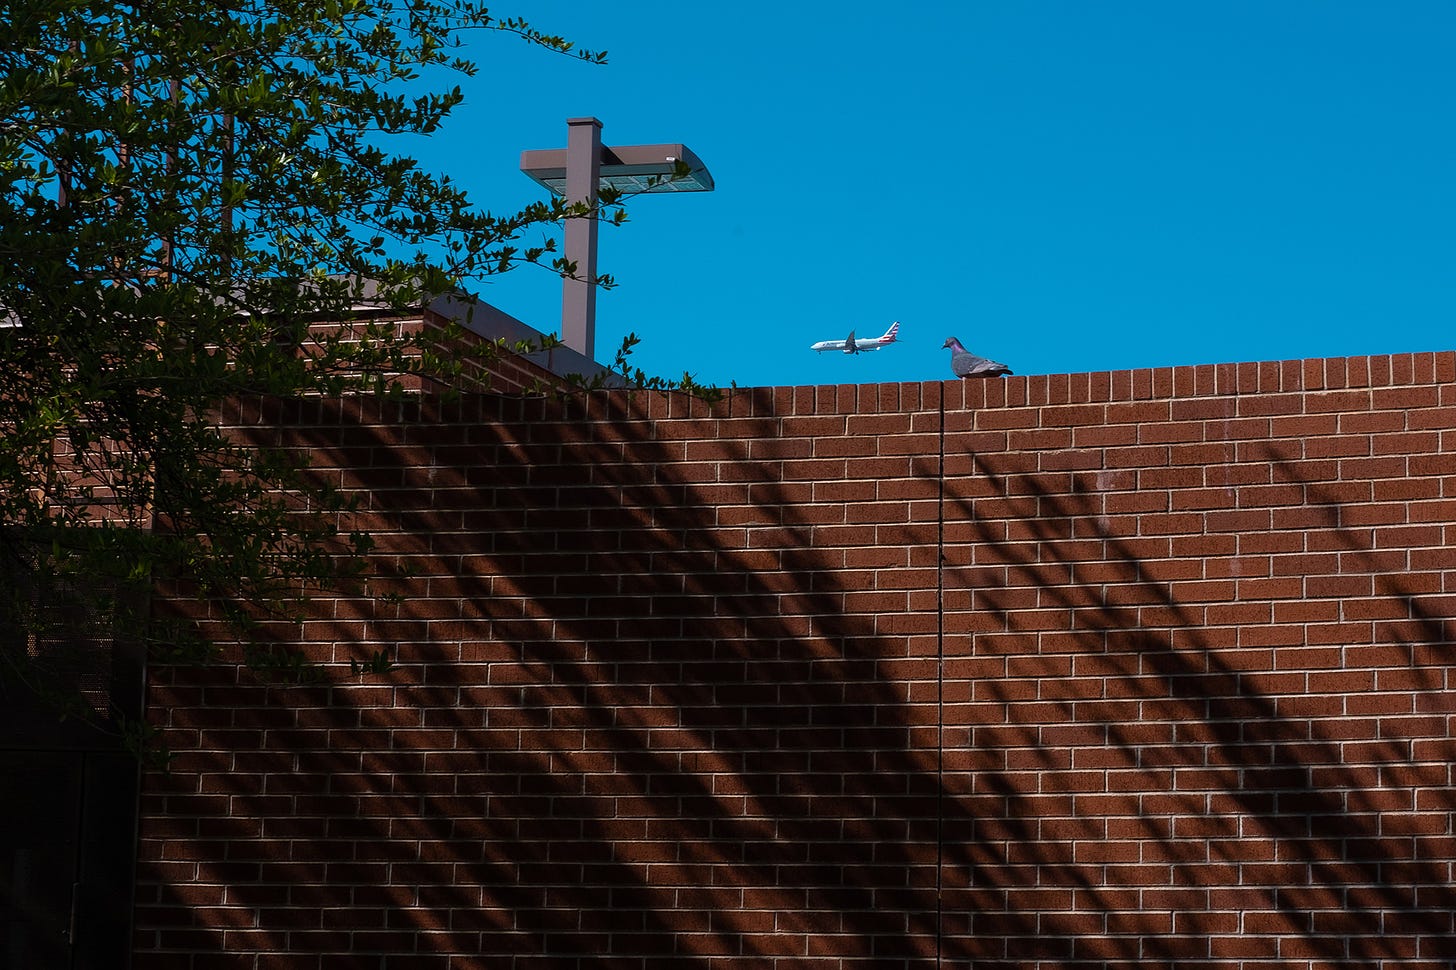 A bird perched on top of a brick wall is juxtaposed with a commercial airliner moving against a clear blue sky.